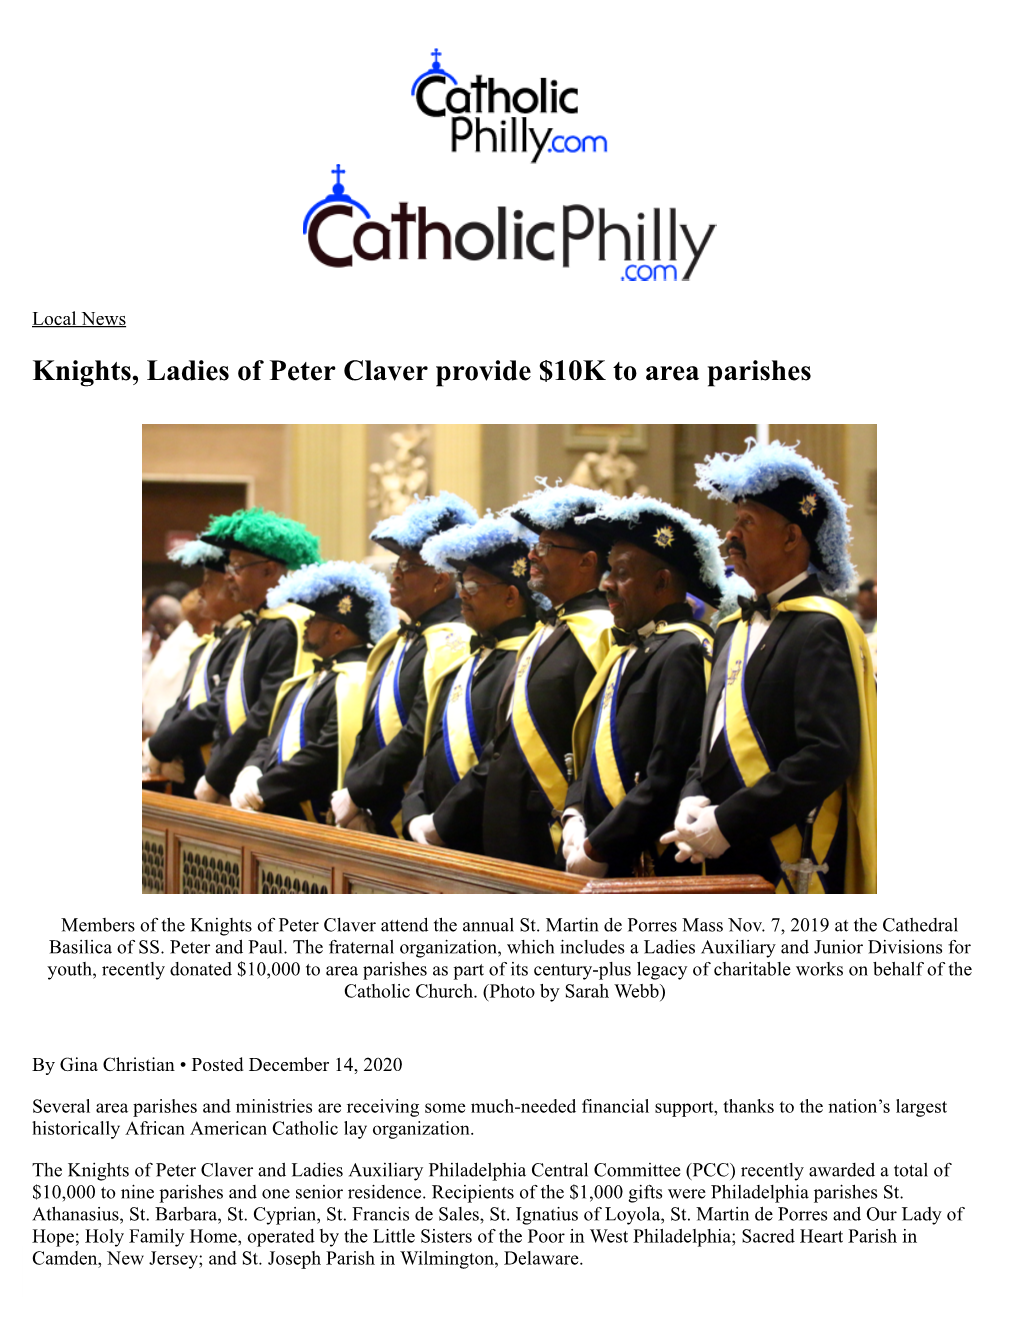 Knights, Ladies of Peter Claver Provide $10K to Area Parishes